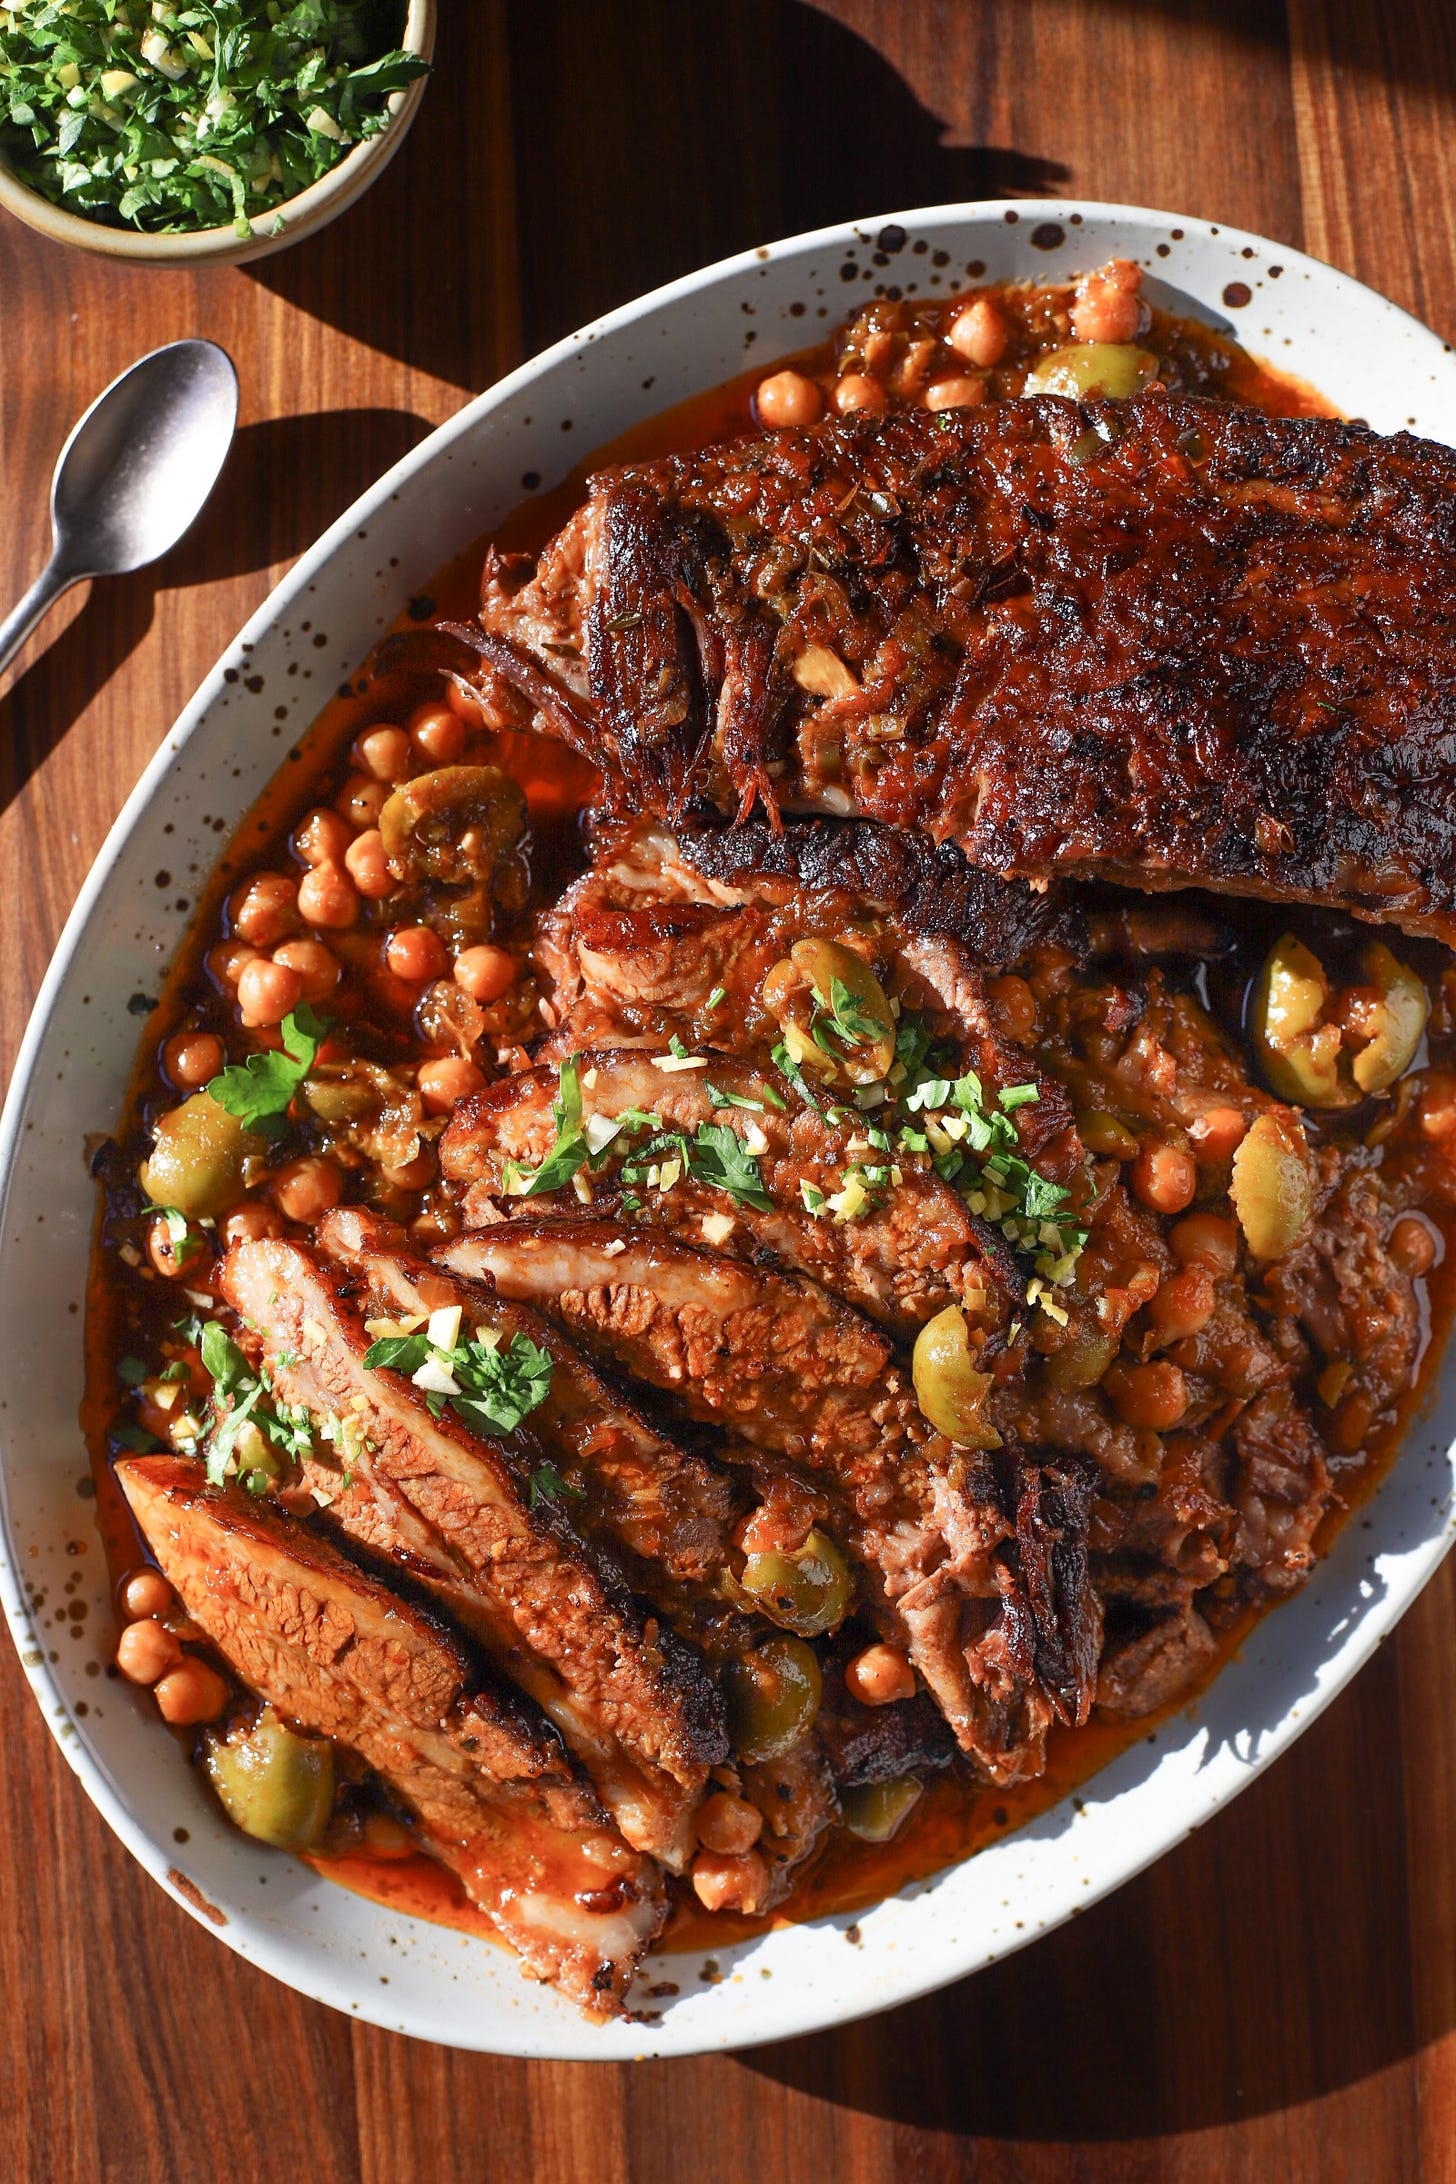 Platter with sliced brisket in a sauce of wine-braised chickpeas and olives